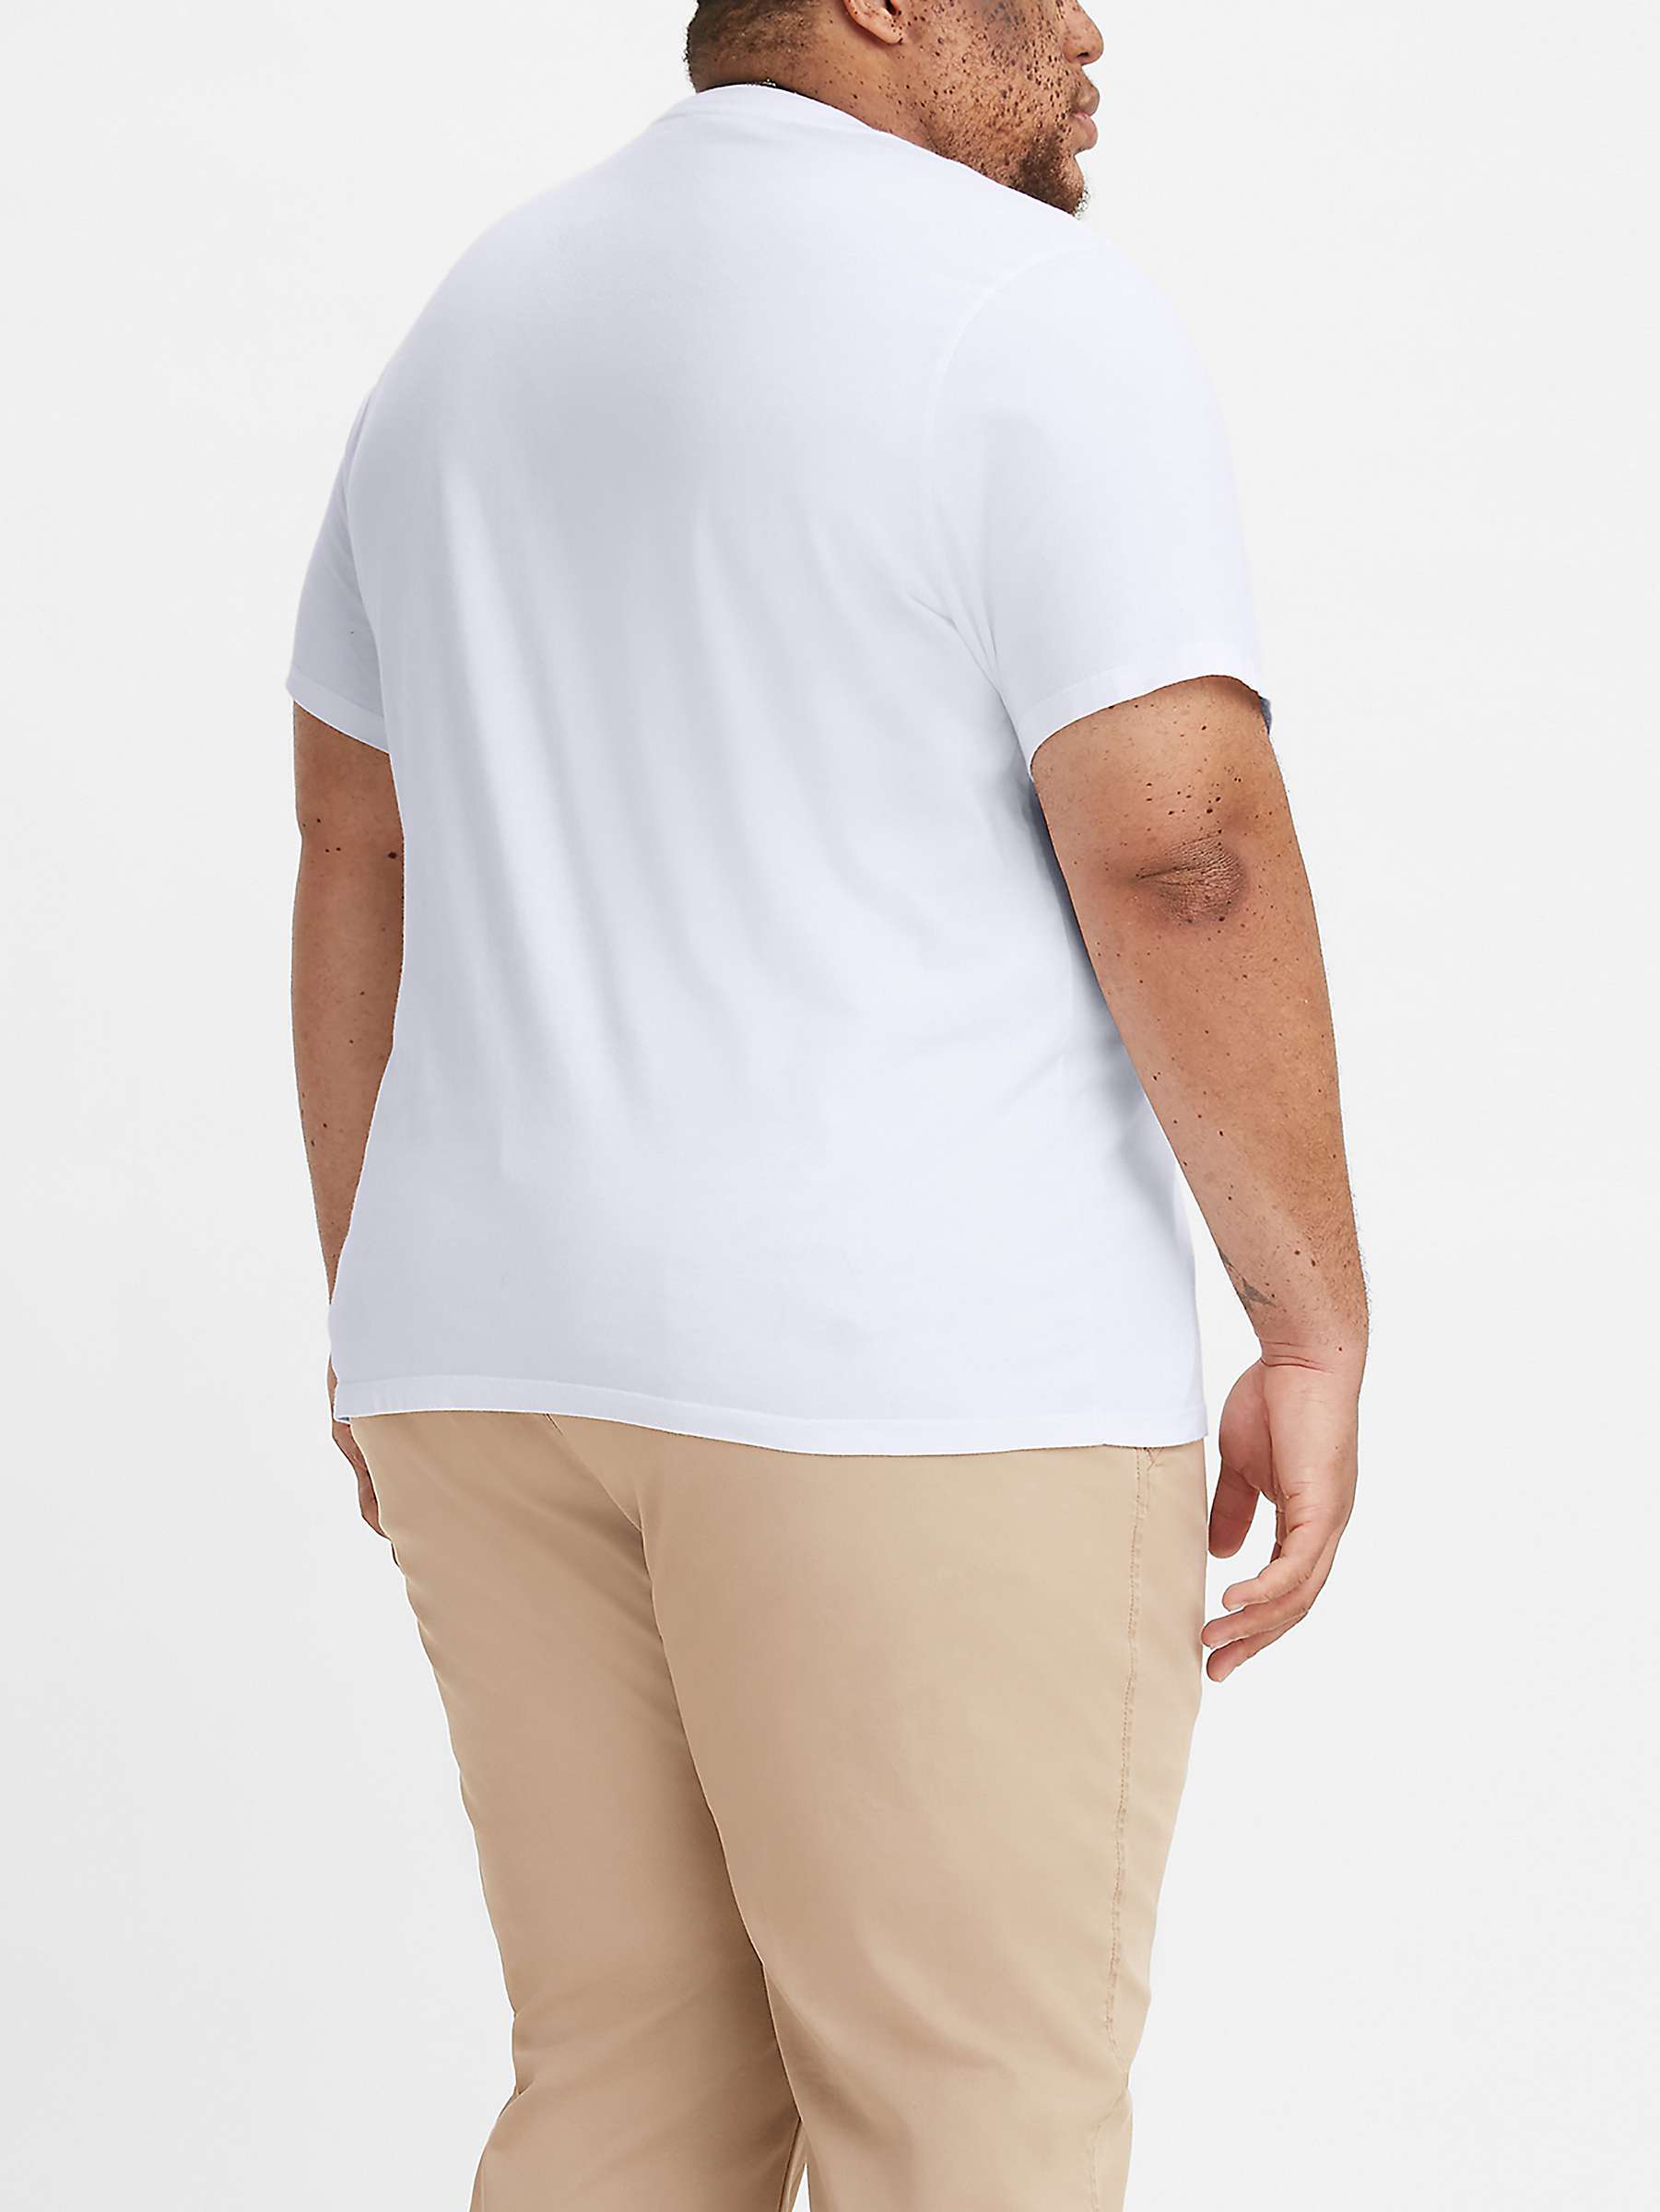 Buy Levi's Batwing Big & Tall Graphic Logo T-Shirt, White Online at johnlewis.com